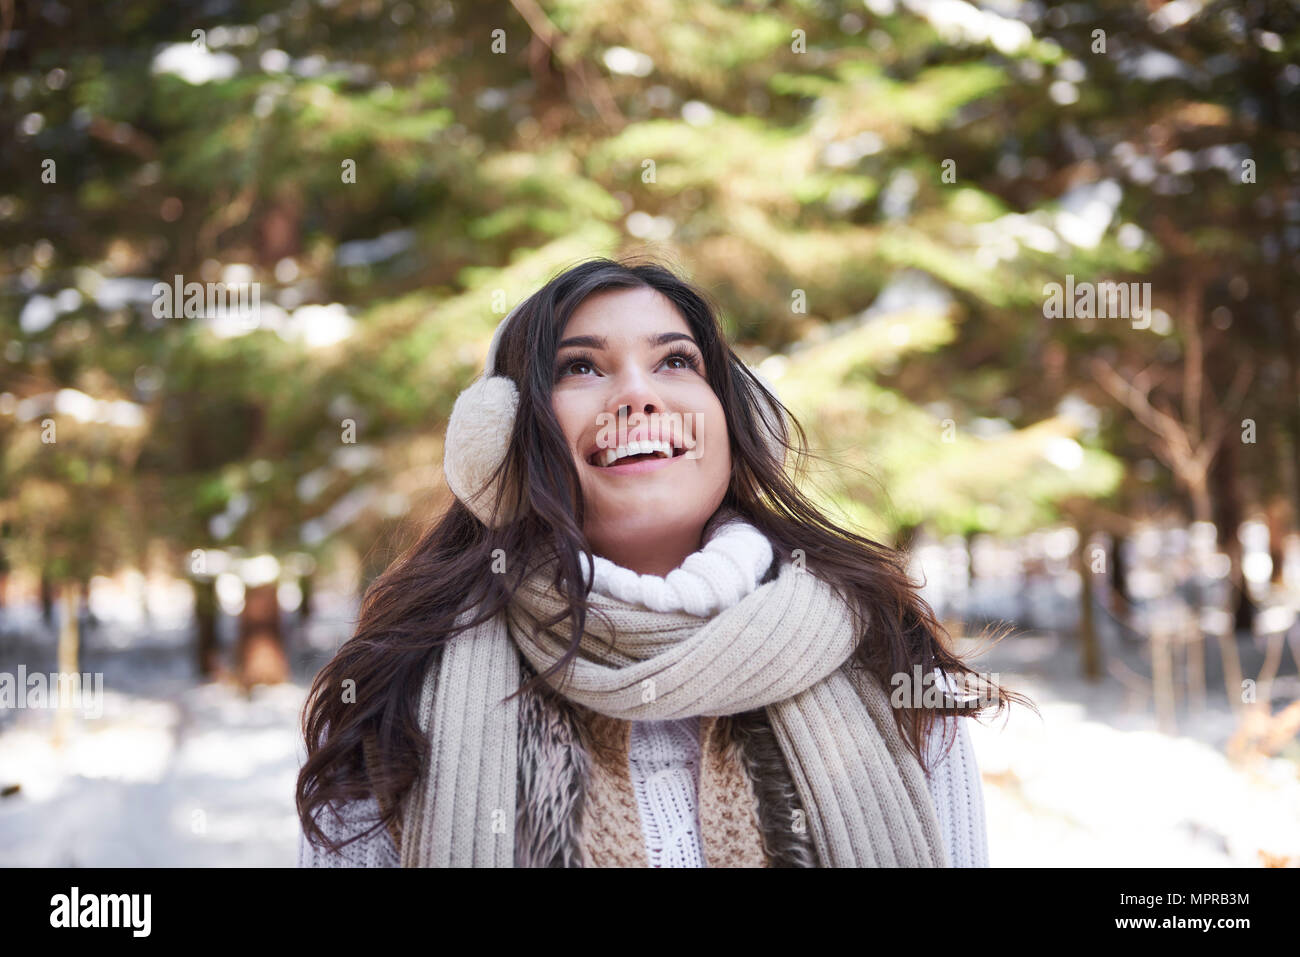 Portrait of happy young woman in winter forest Banque D'Images